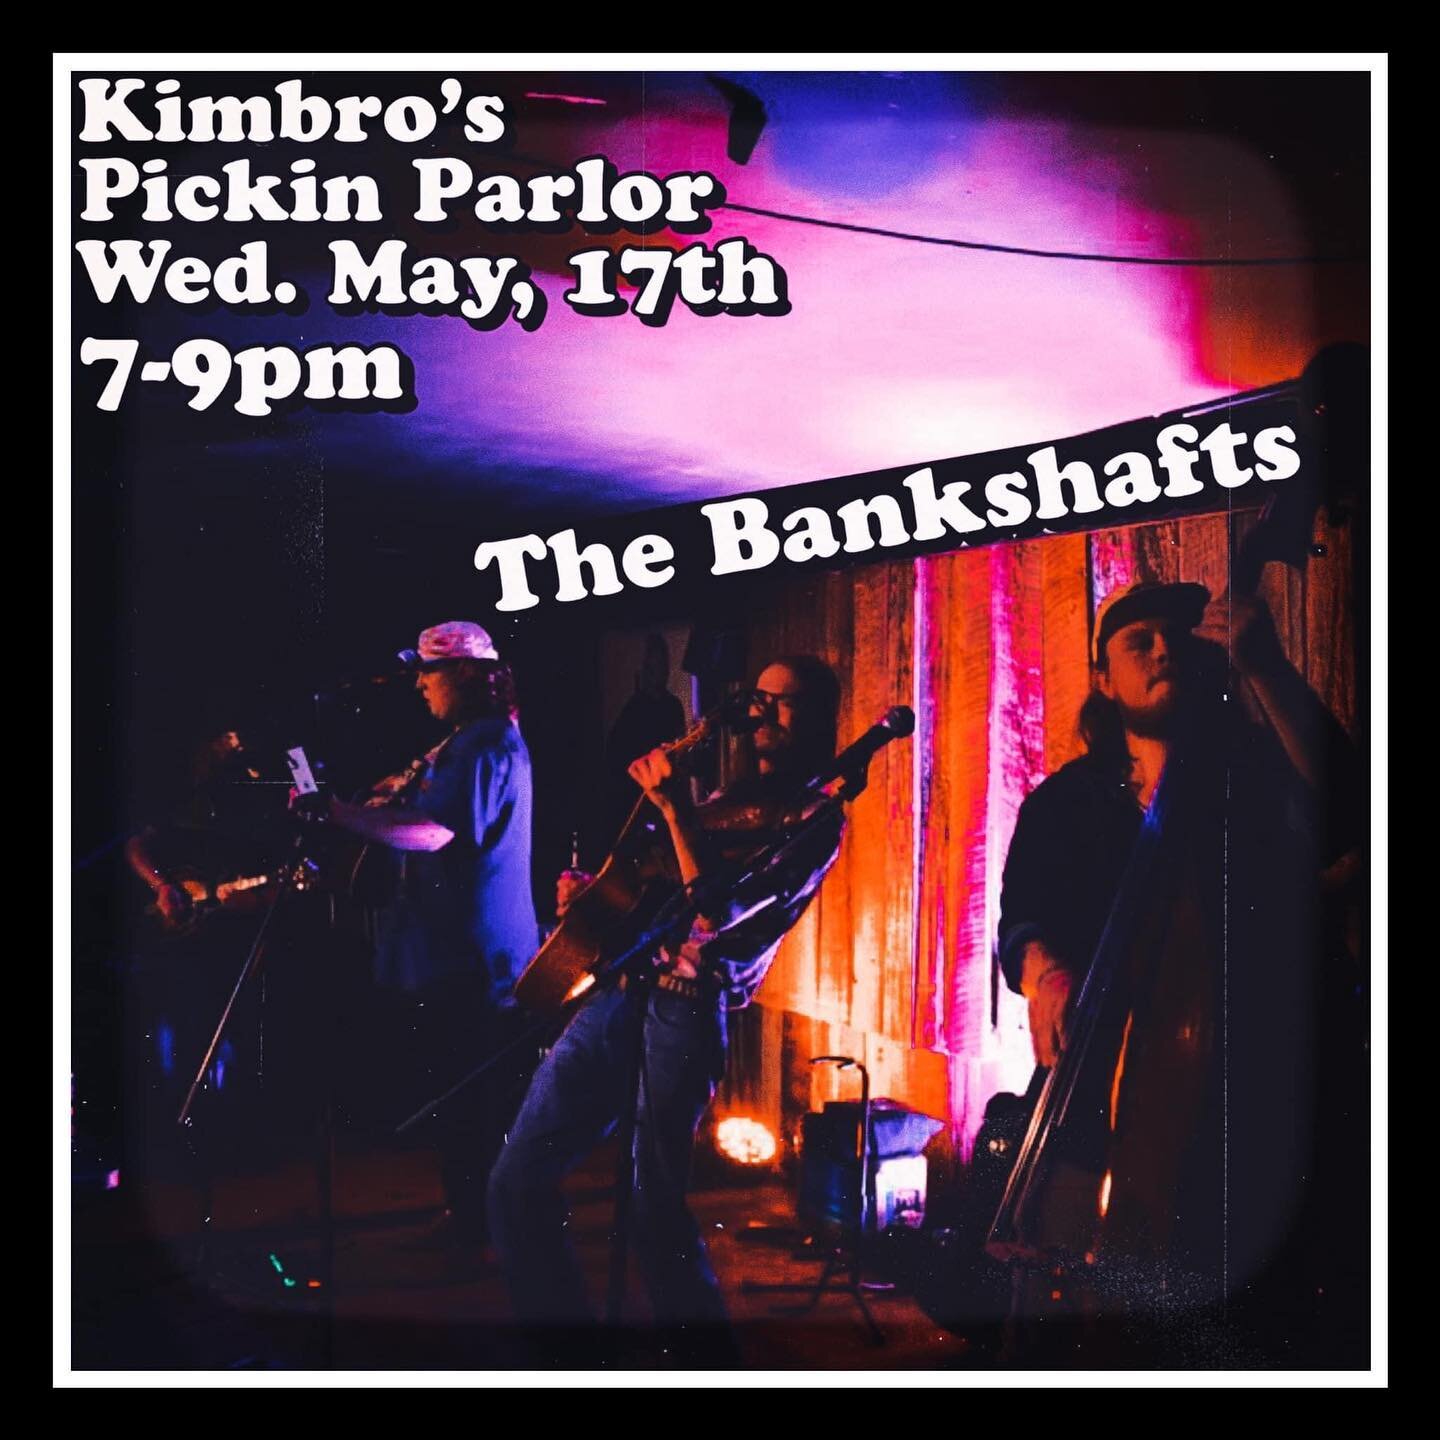 Want some bluegrass?  Our friends the Bankshafts will be dishing it out and laying it on thick tonight at 7pm.  At 9pm, local favorites Samantha Rae and the cats are coming to light the fire under our collective bums with some scorching blues and sou